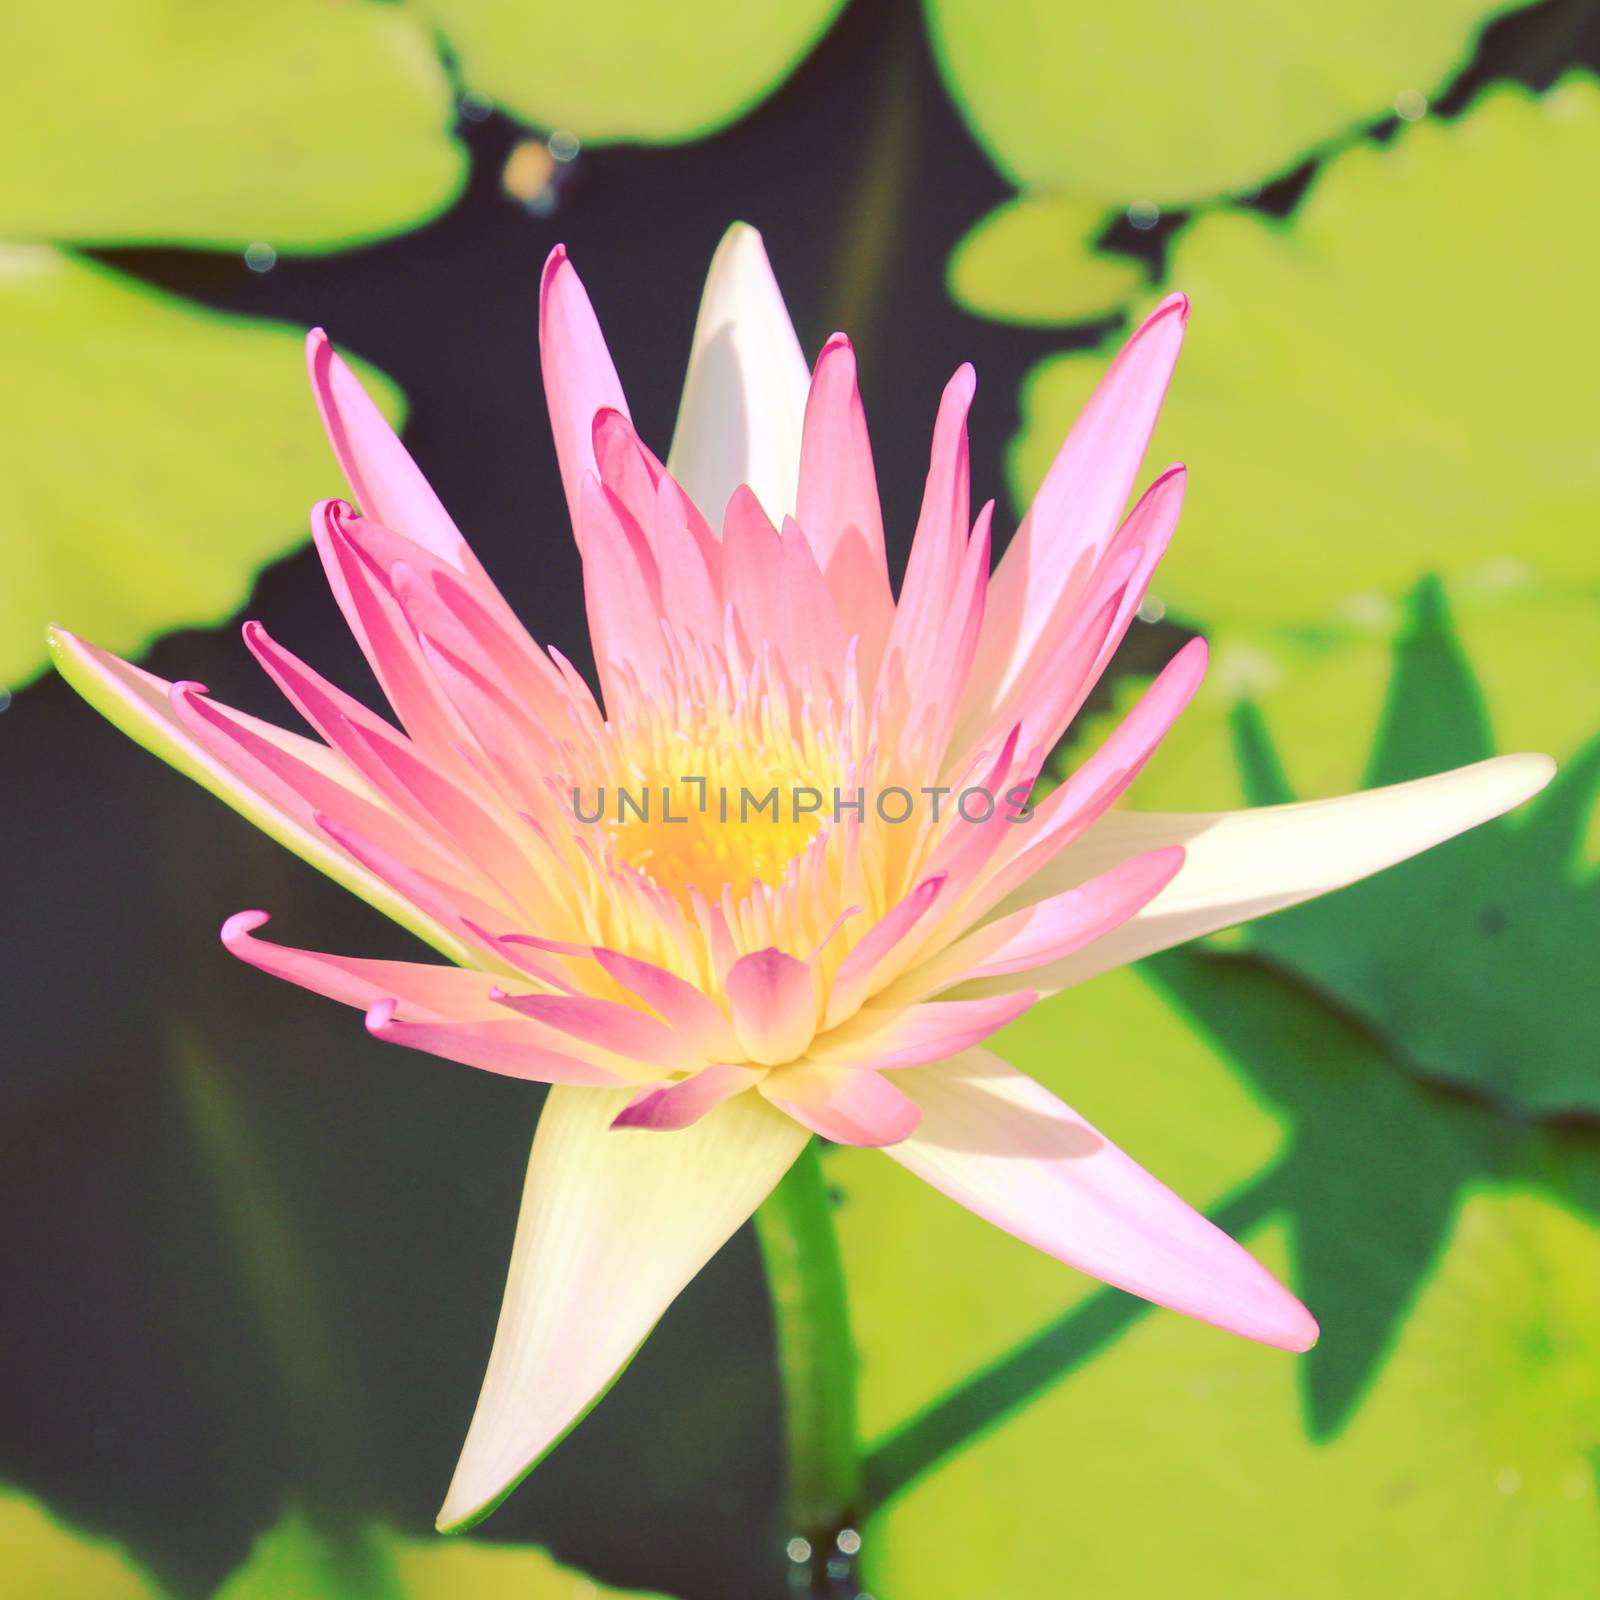 Lotus flower on the water with retro filter effect by nuchylee